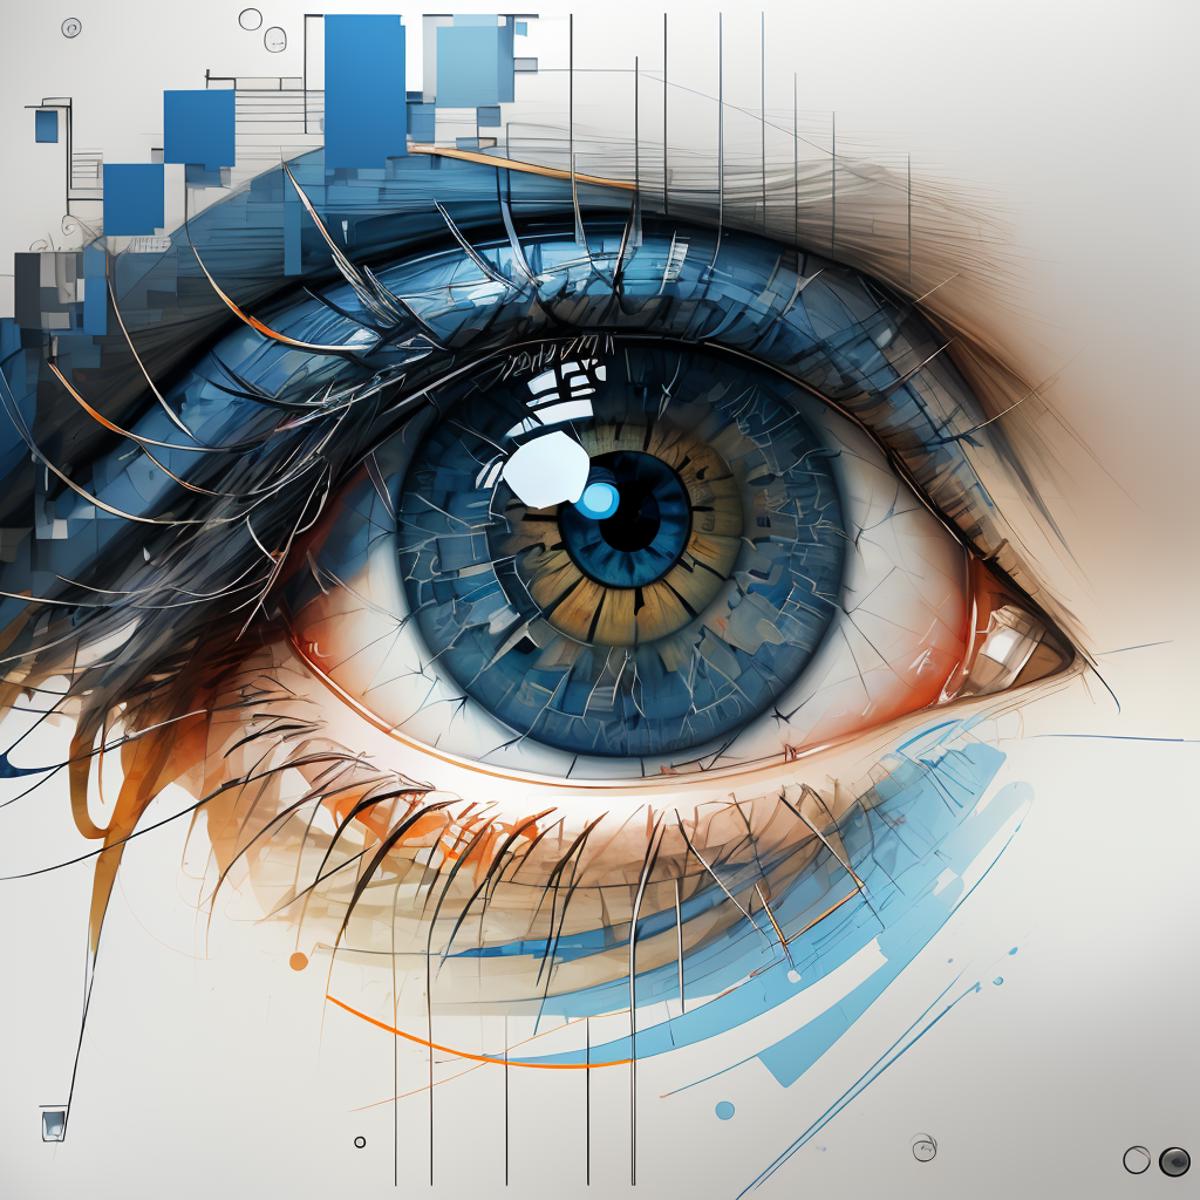 Eye Art: A Detailed and Creative Portrait of a Human Eye with Blue and Yellow Hues